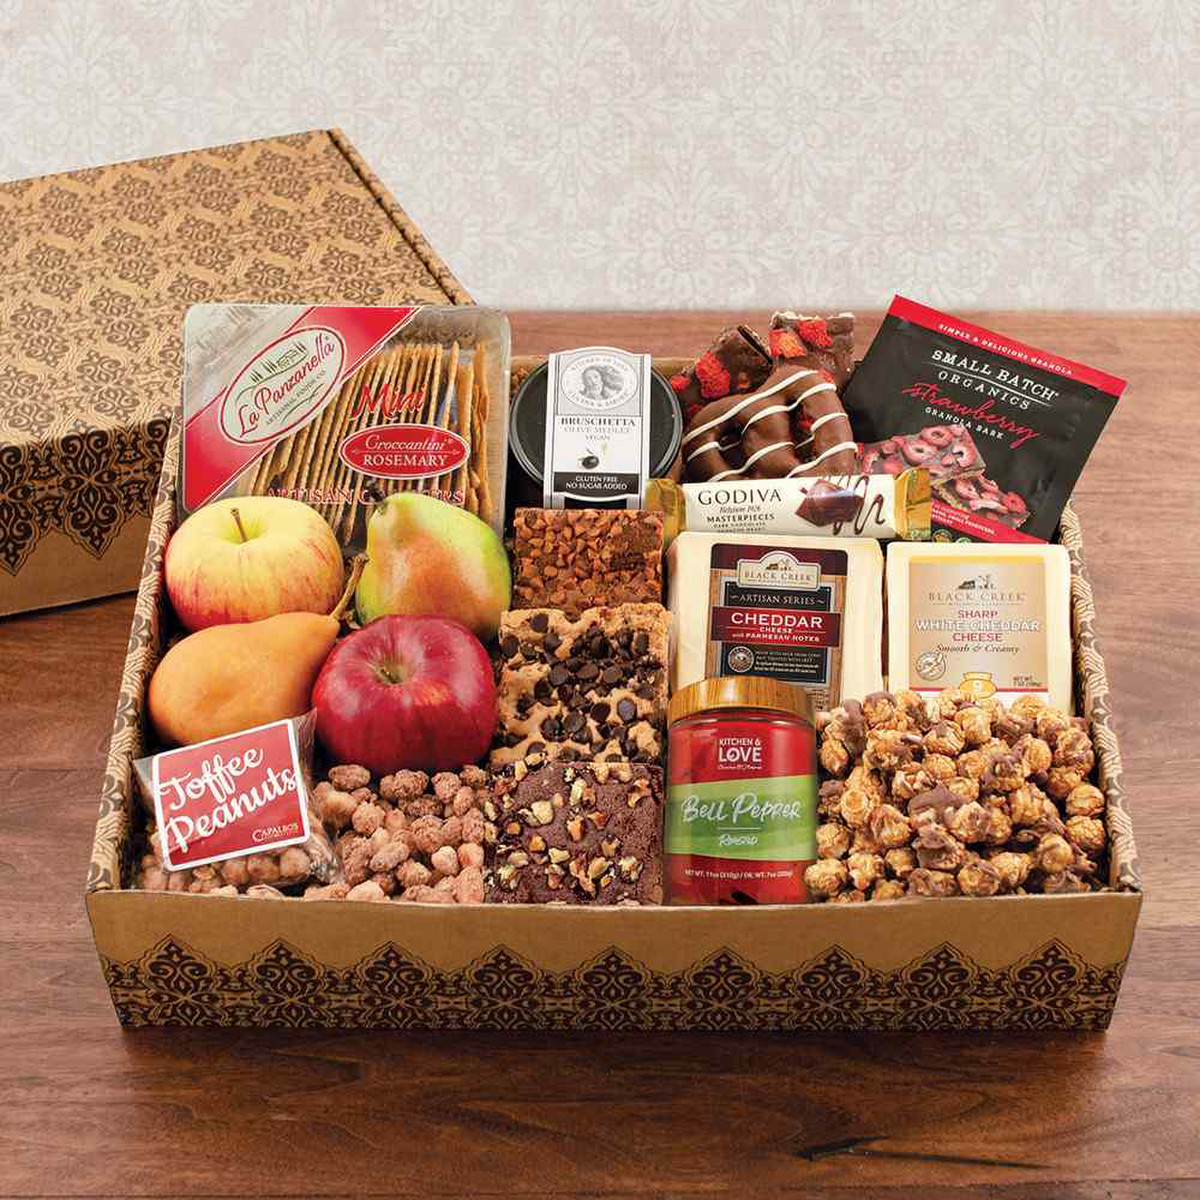 Capalbos Showstopper Fruit and Gourmet Gourmet Gift Box